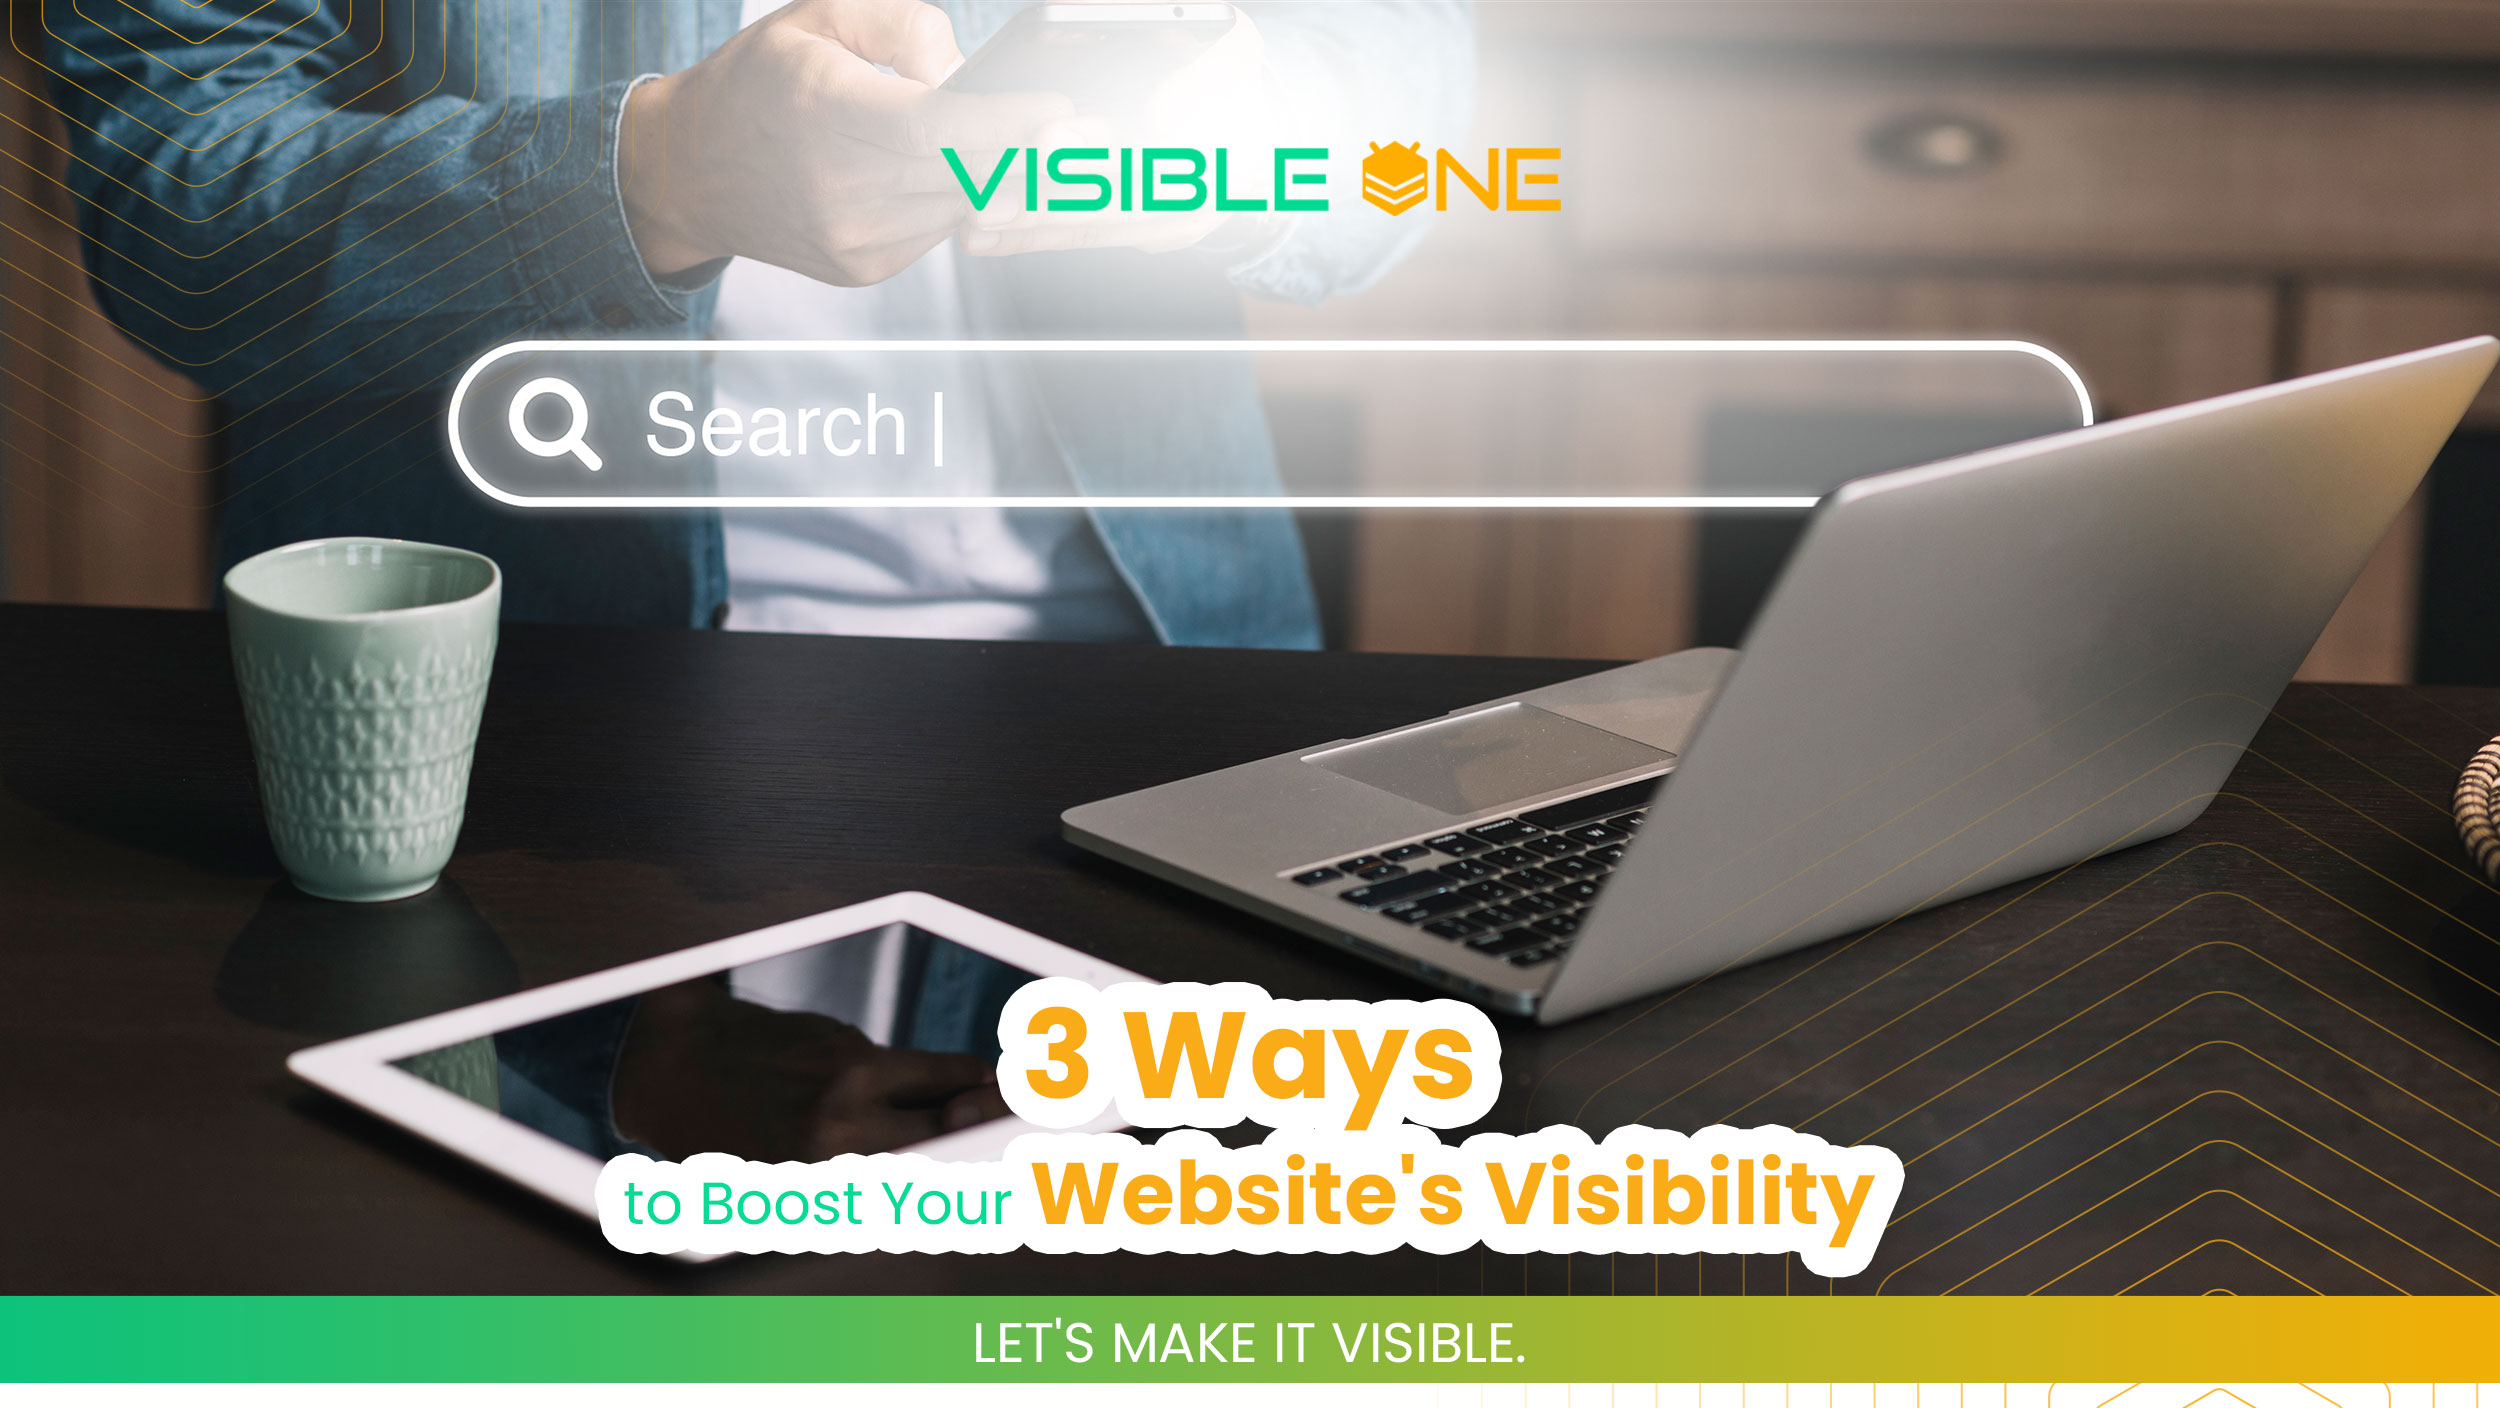 3 Ways to Boost Your Website’s Visibility